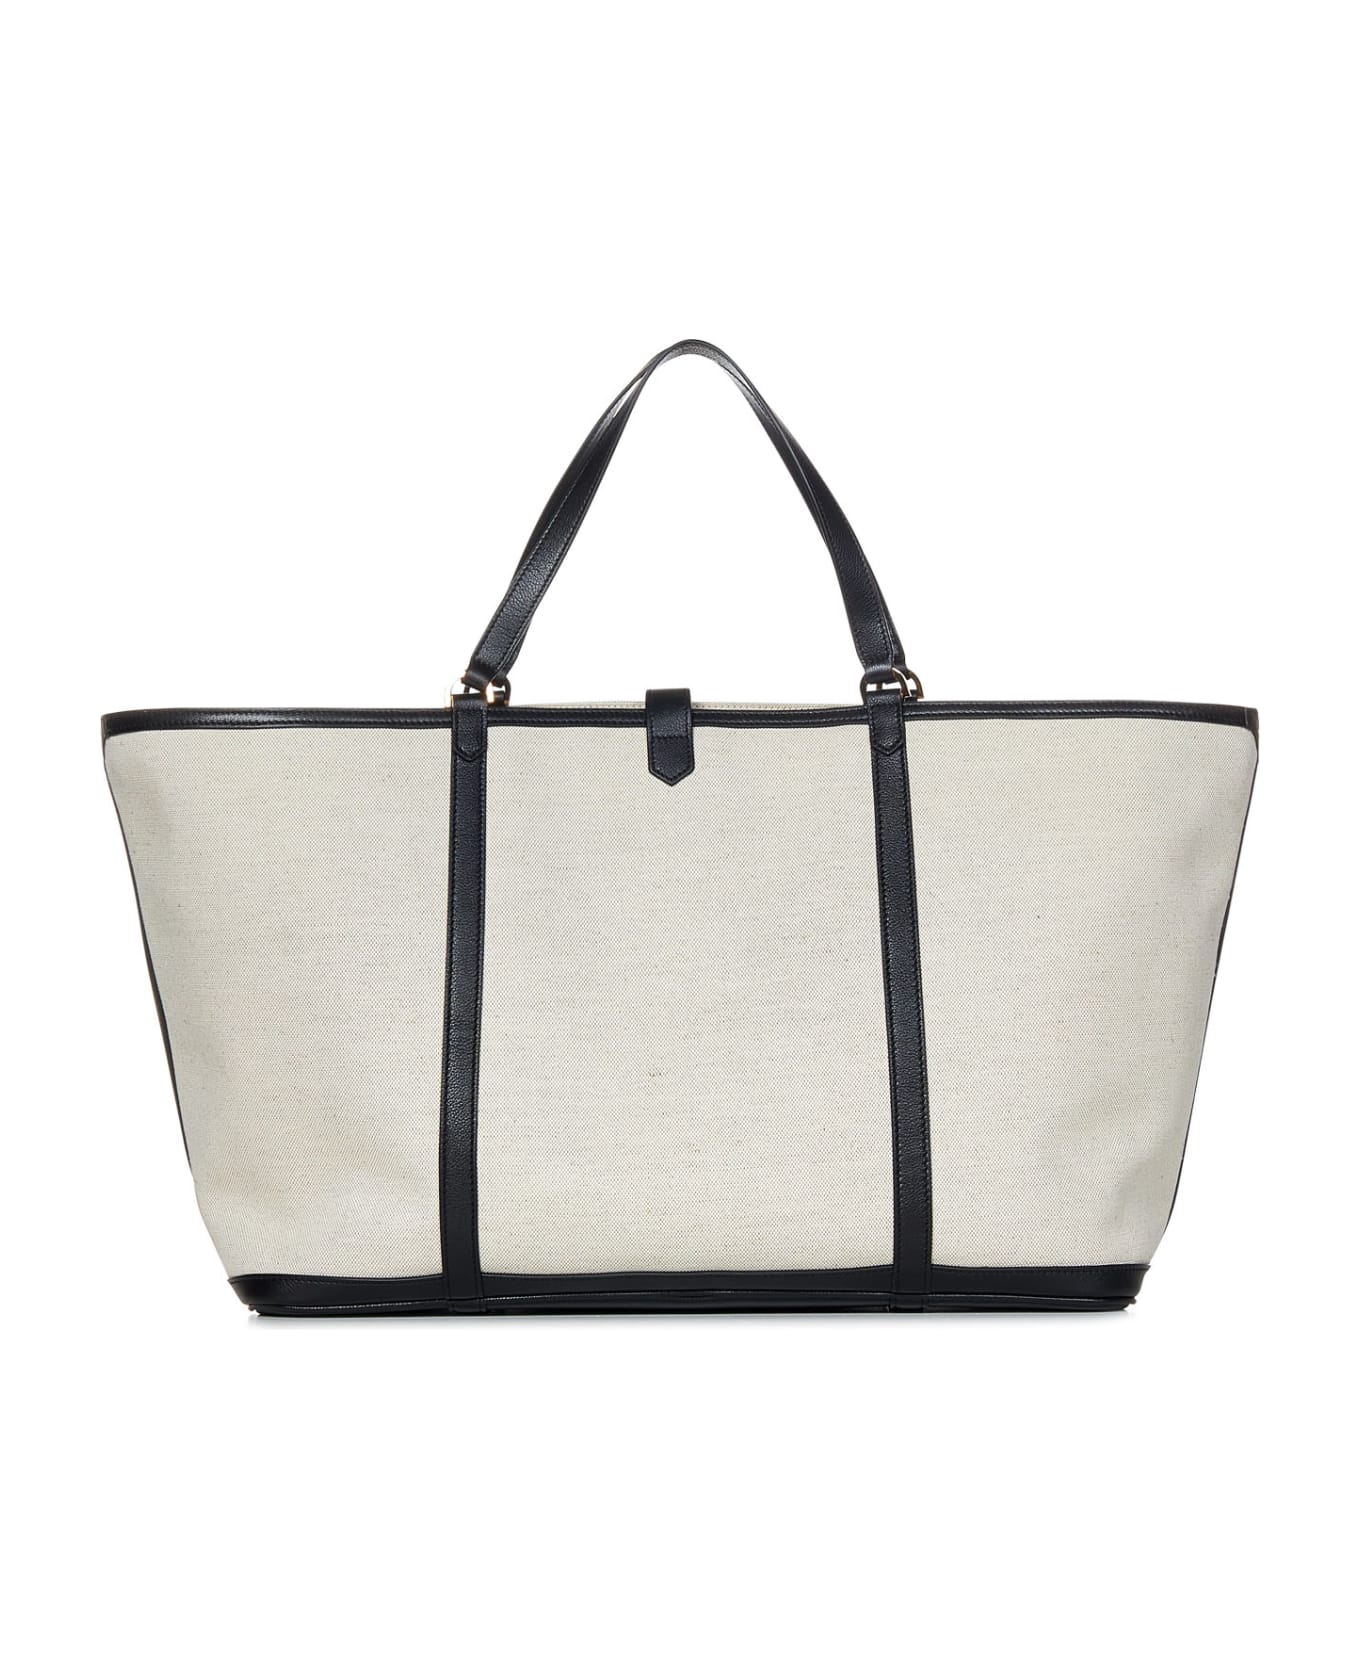 Tom Ford East West Tote - Beige